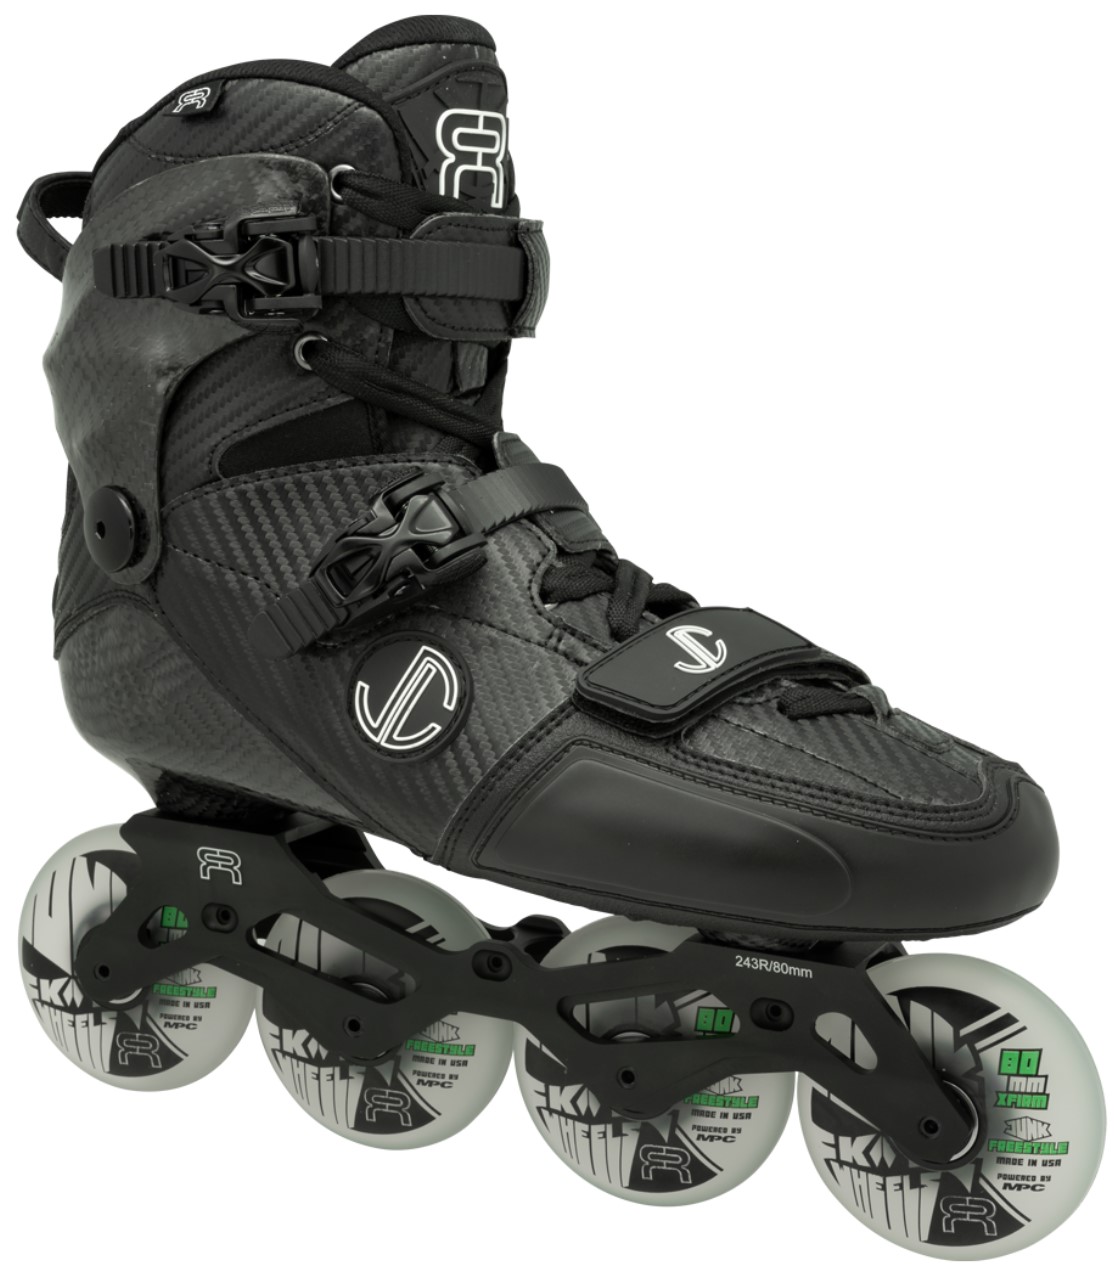 FR SL 80 Freestyle inline skate model 2021 for freestyle slalom with carbon boot and carbon cuff and rockered V3 Deluxe frame